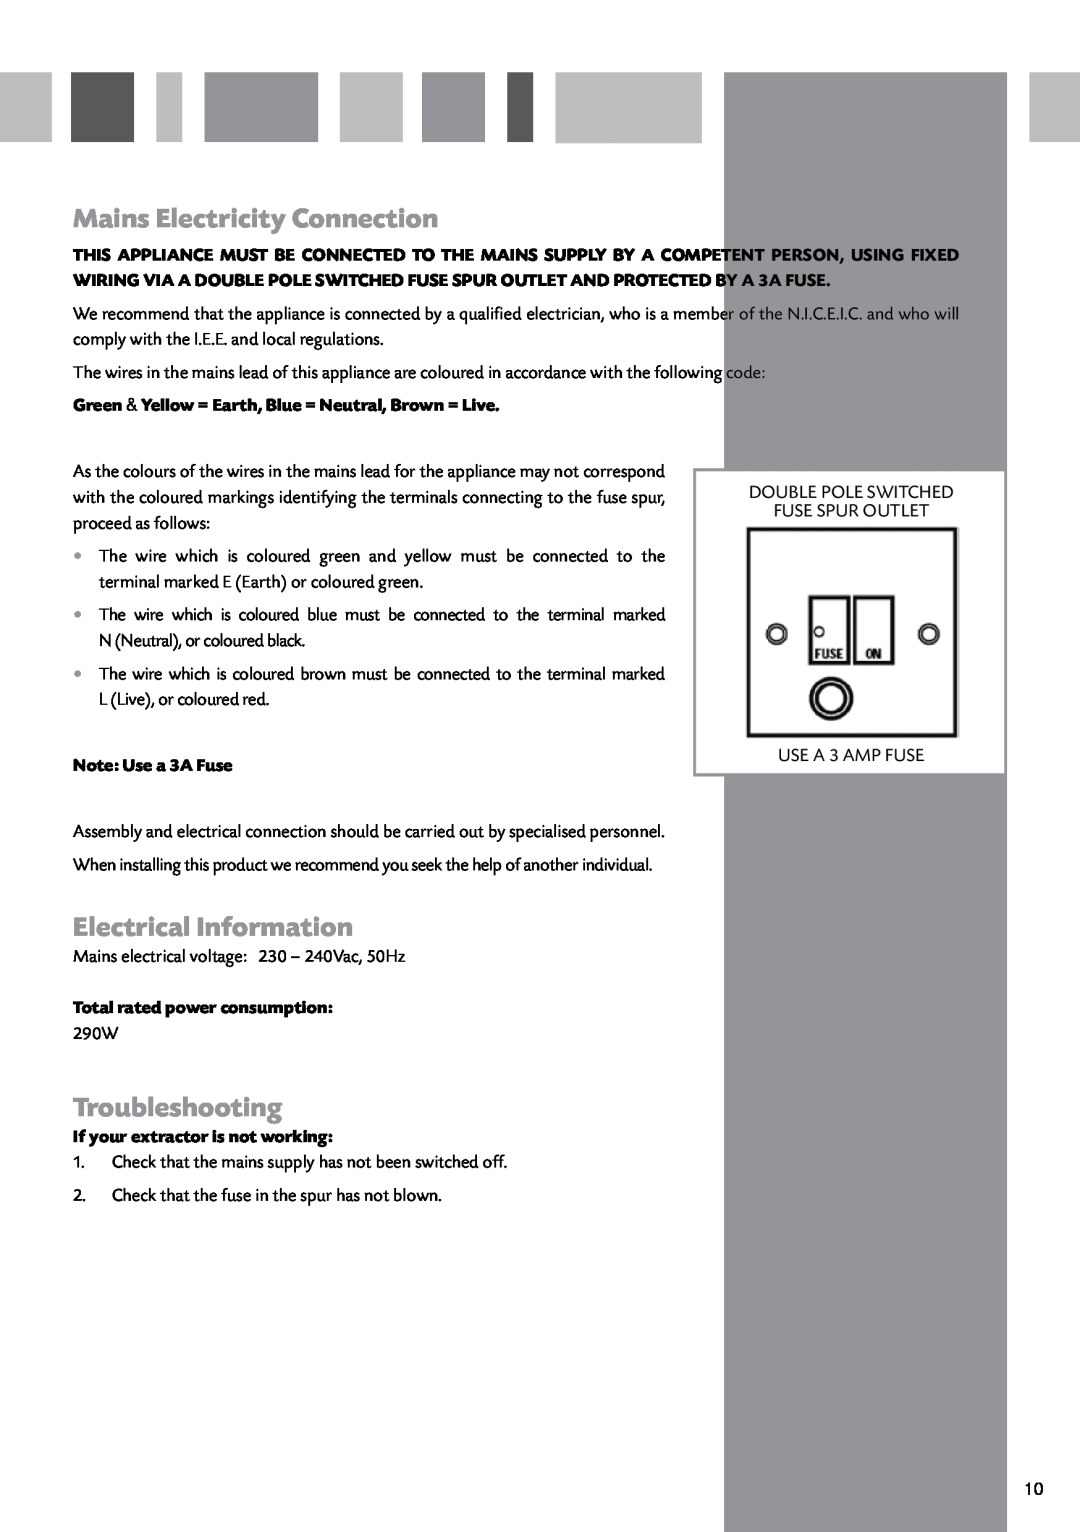 CDA 3L9 manual Mains Electricity Connection, Electrical Information, Troubleshooting, Note Use a 3A Fuse 